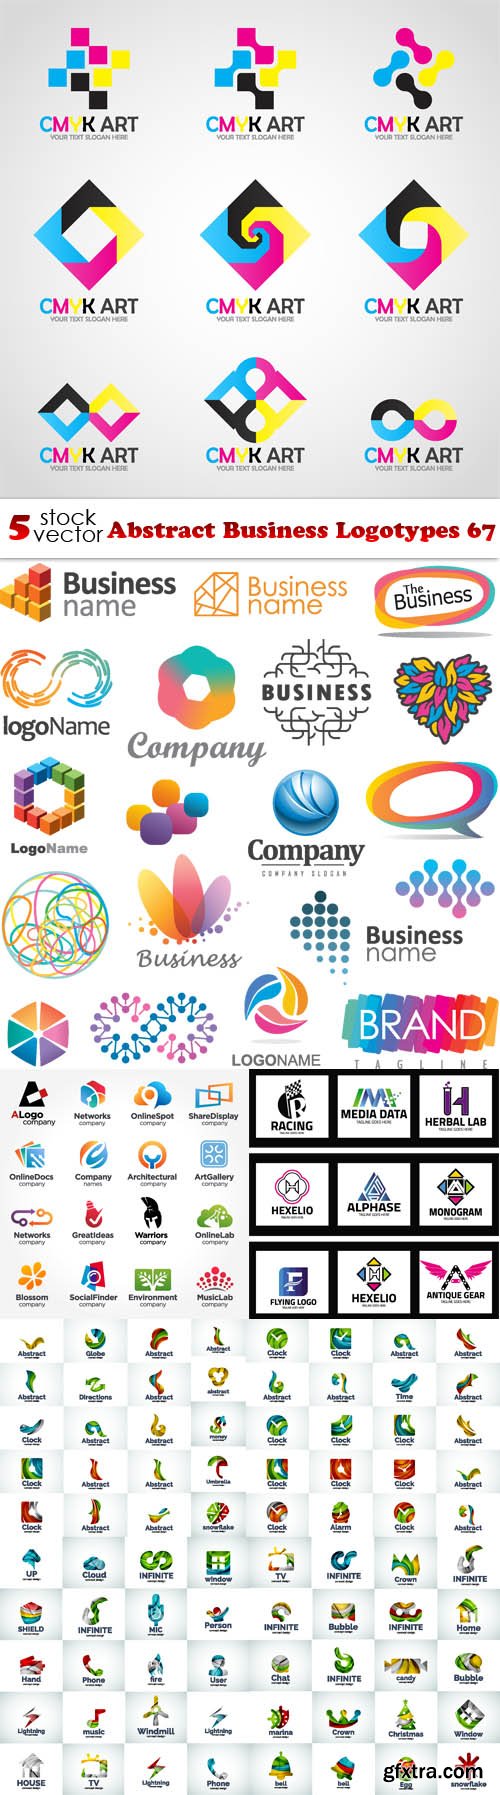 Vectors - Abstract Business Logotypes 67